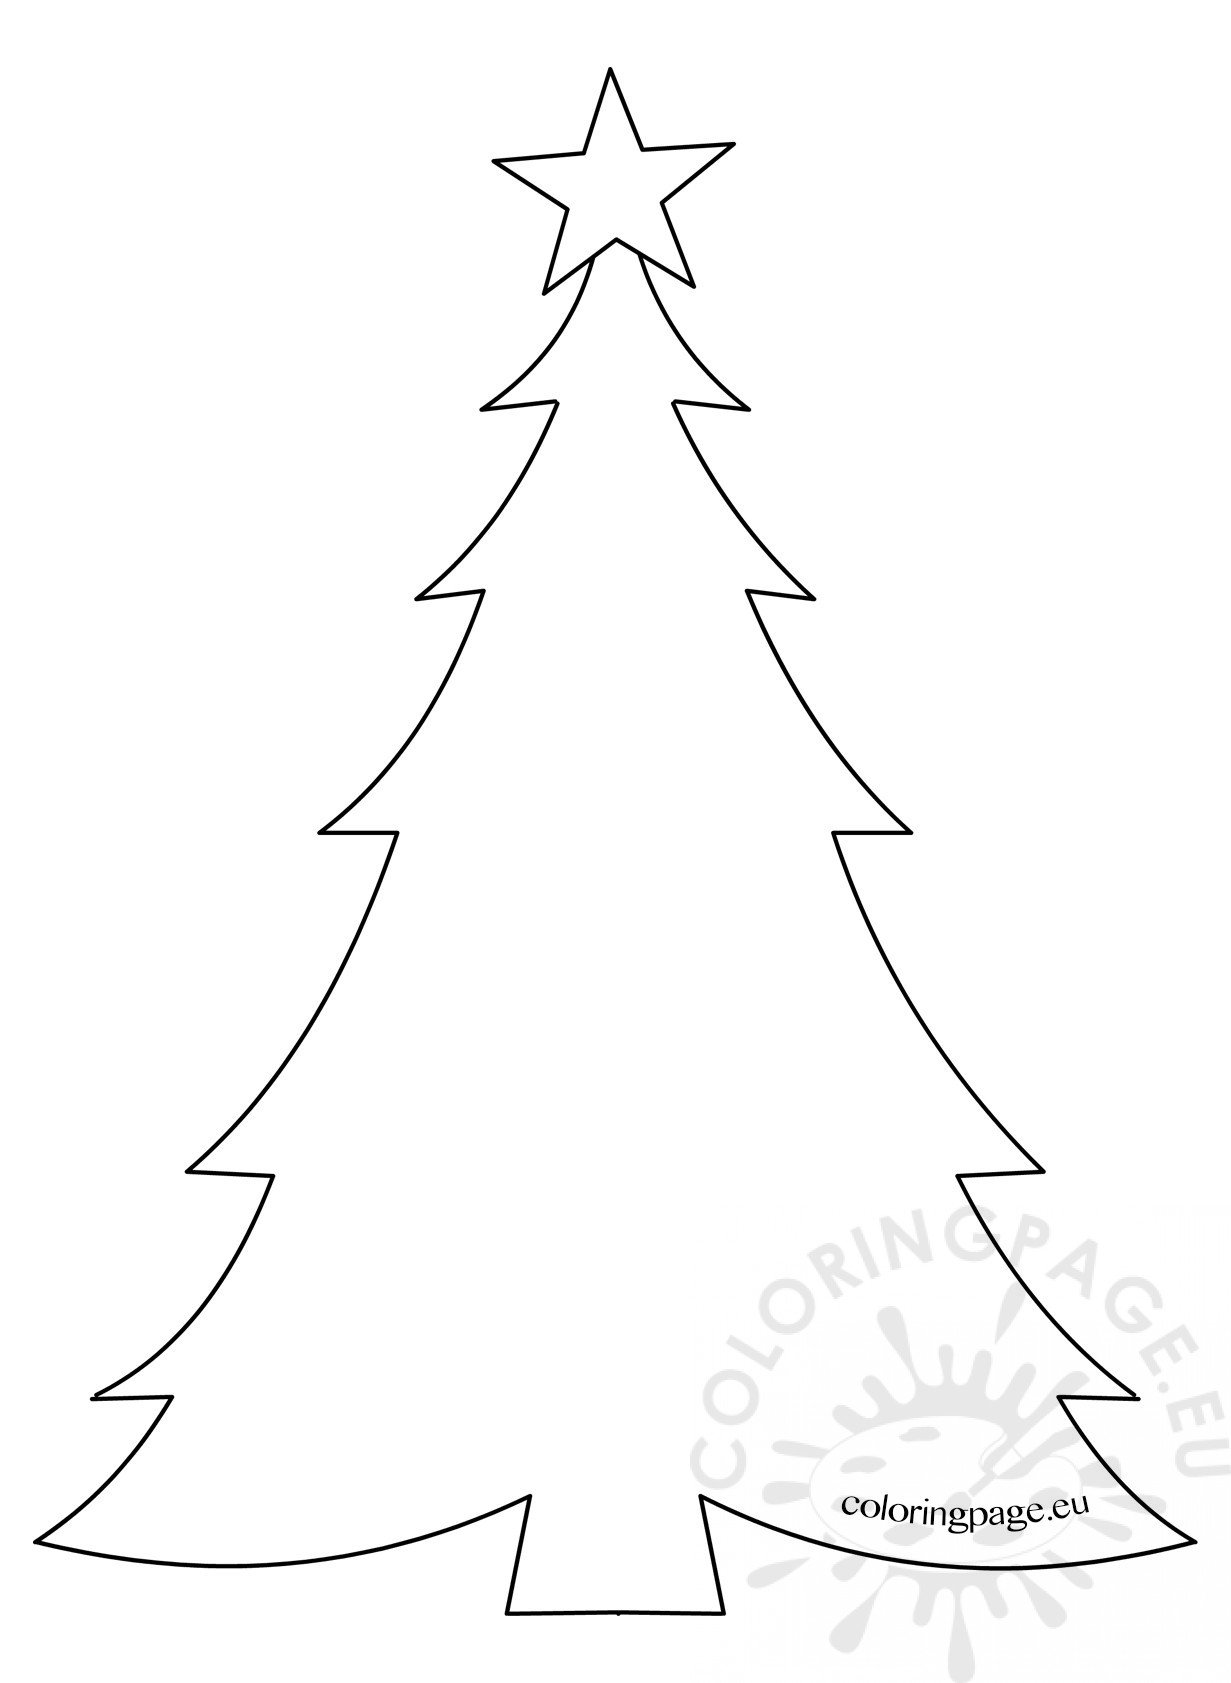 Template Christmas Tree with star – Coloring Page